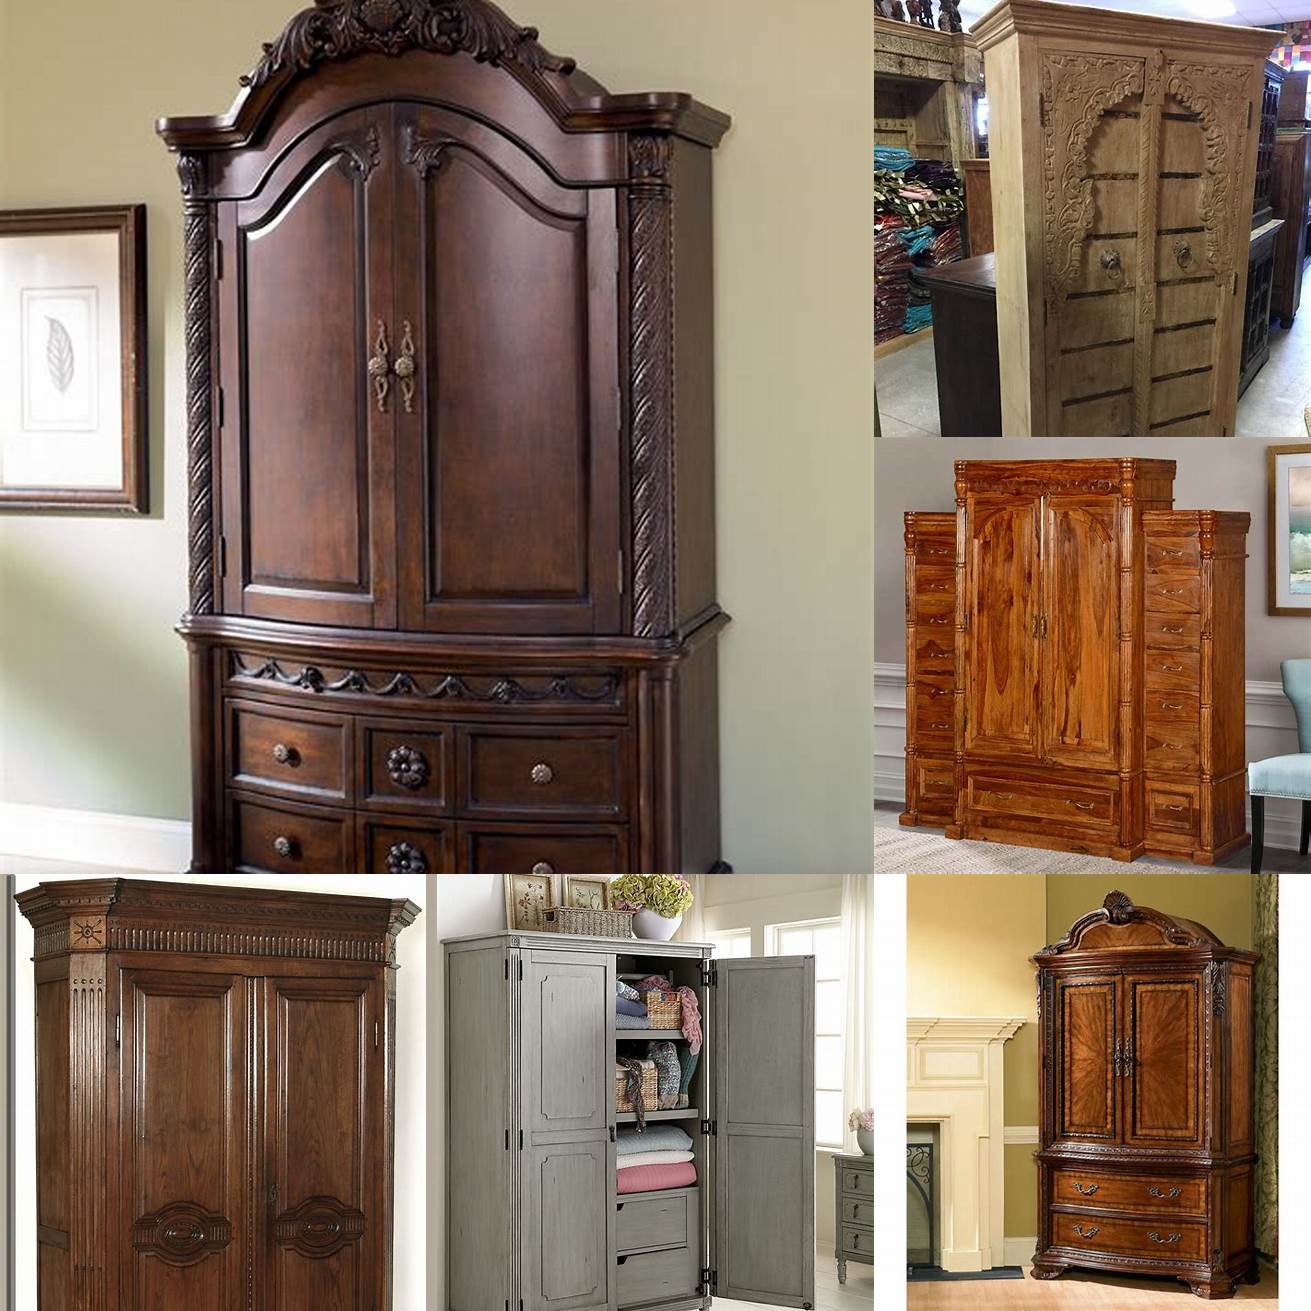 Traditional Armoires These are the most common type of armoire and come in a variety of styles and finishes